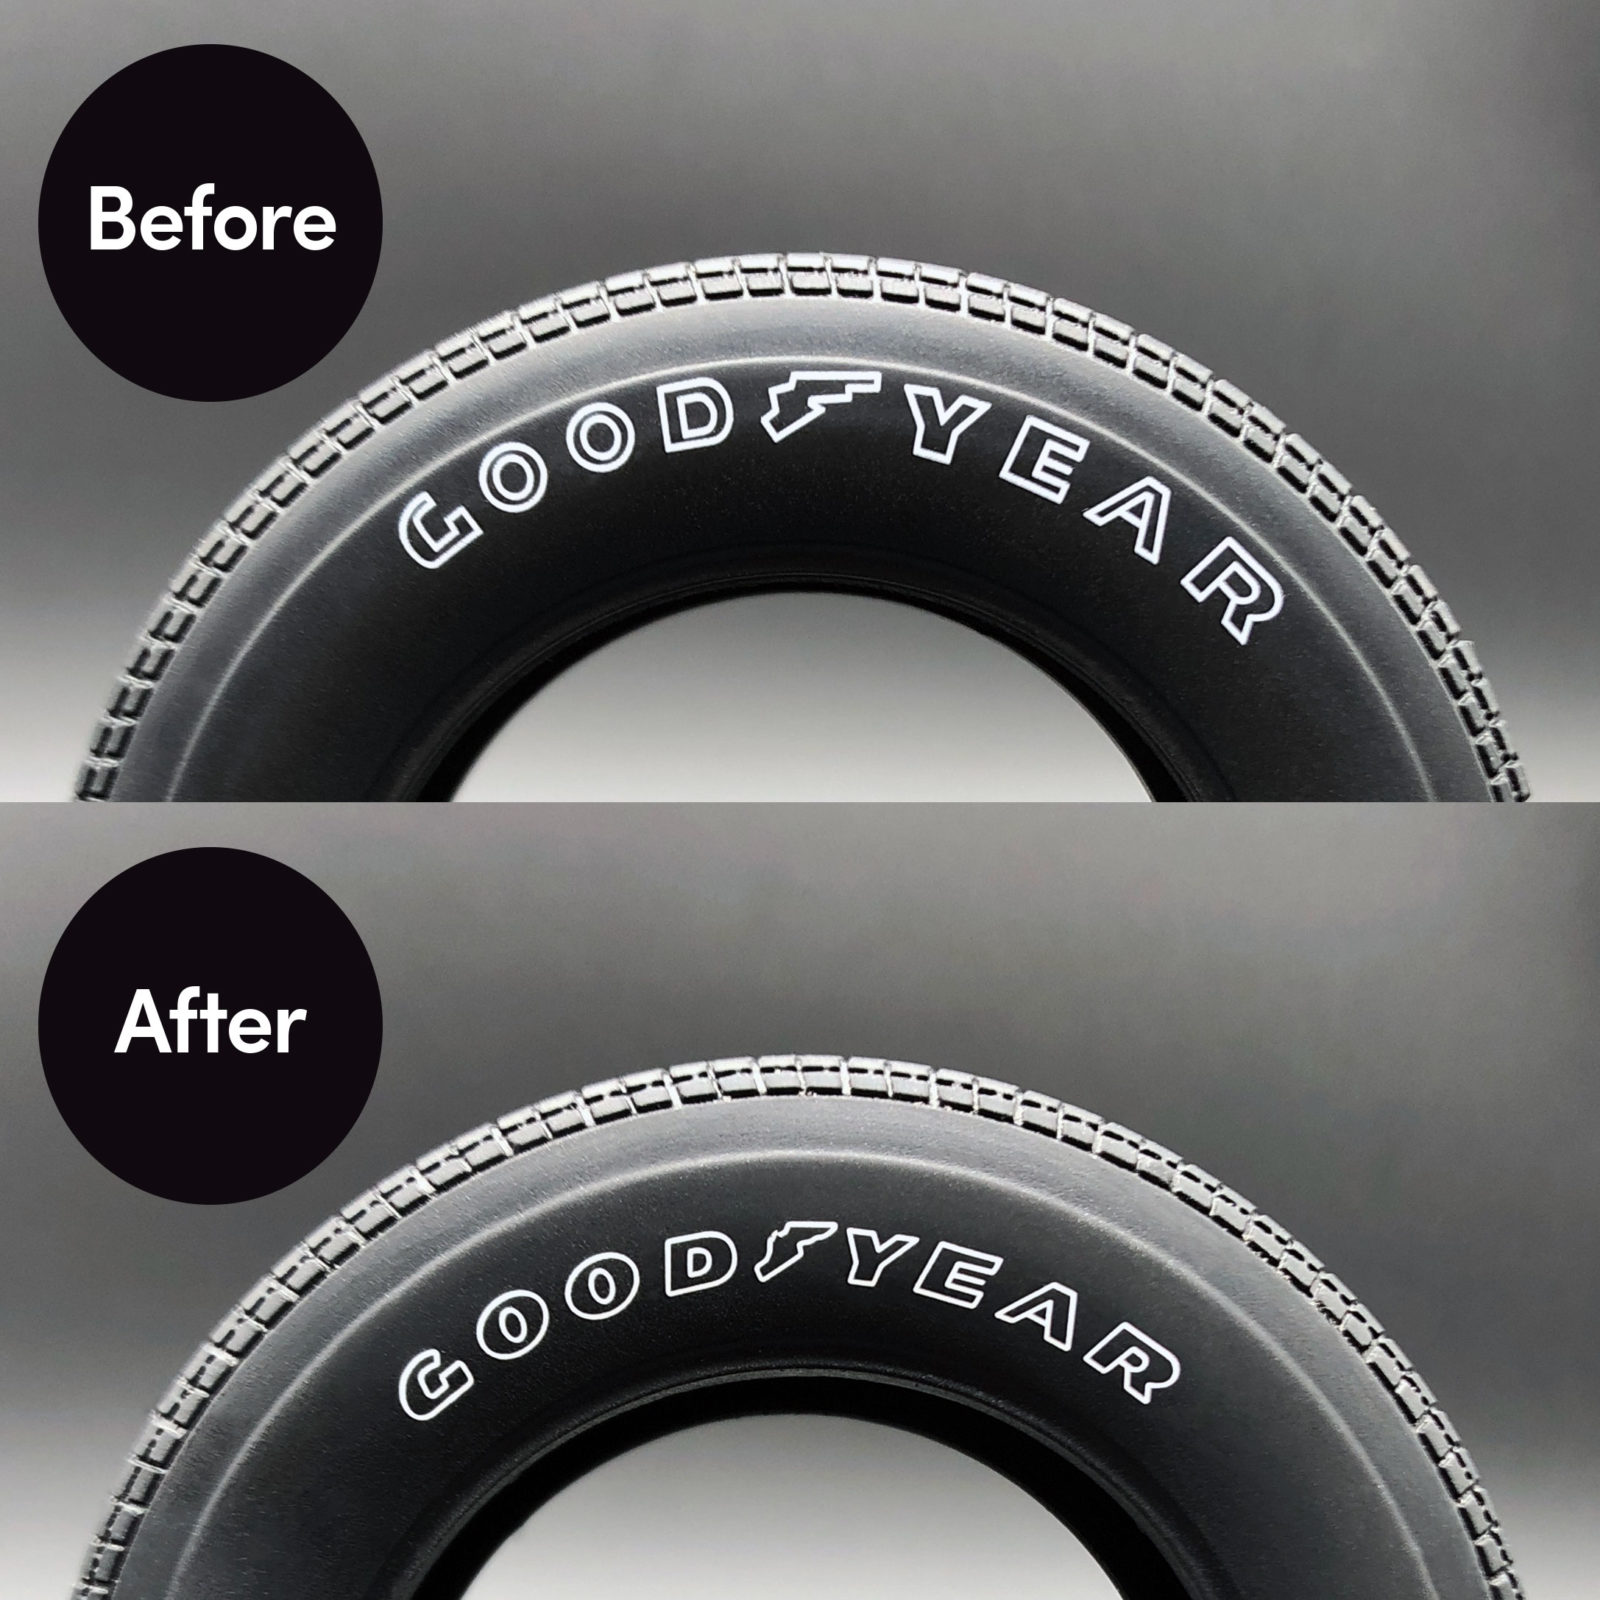 Before and After installation of DeLorean Tyre Transfer Kit mod